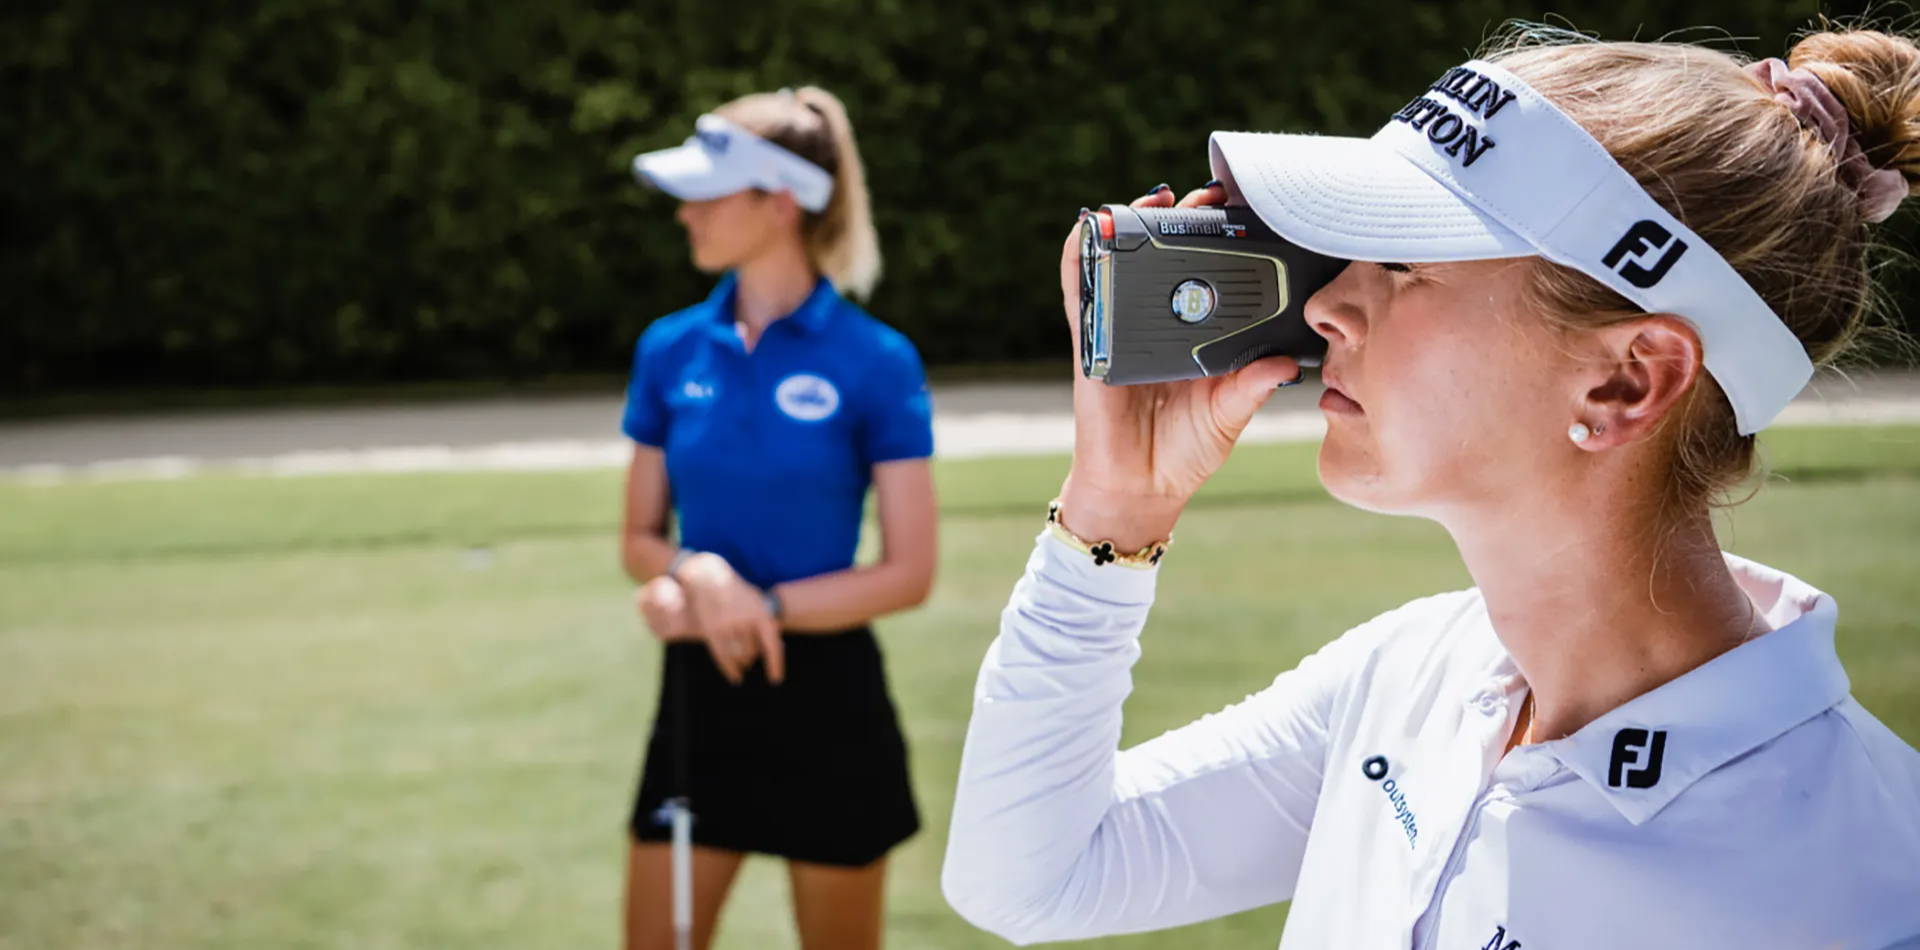 A golfer holding the Bushnell Pro X3 rangefinder to her eye while another woman golfer looks at her target on the golf course